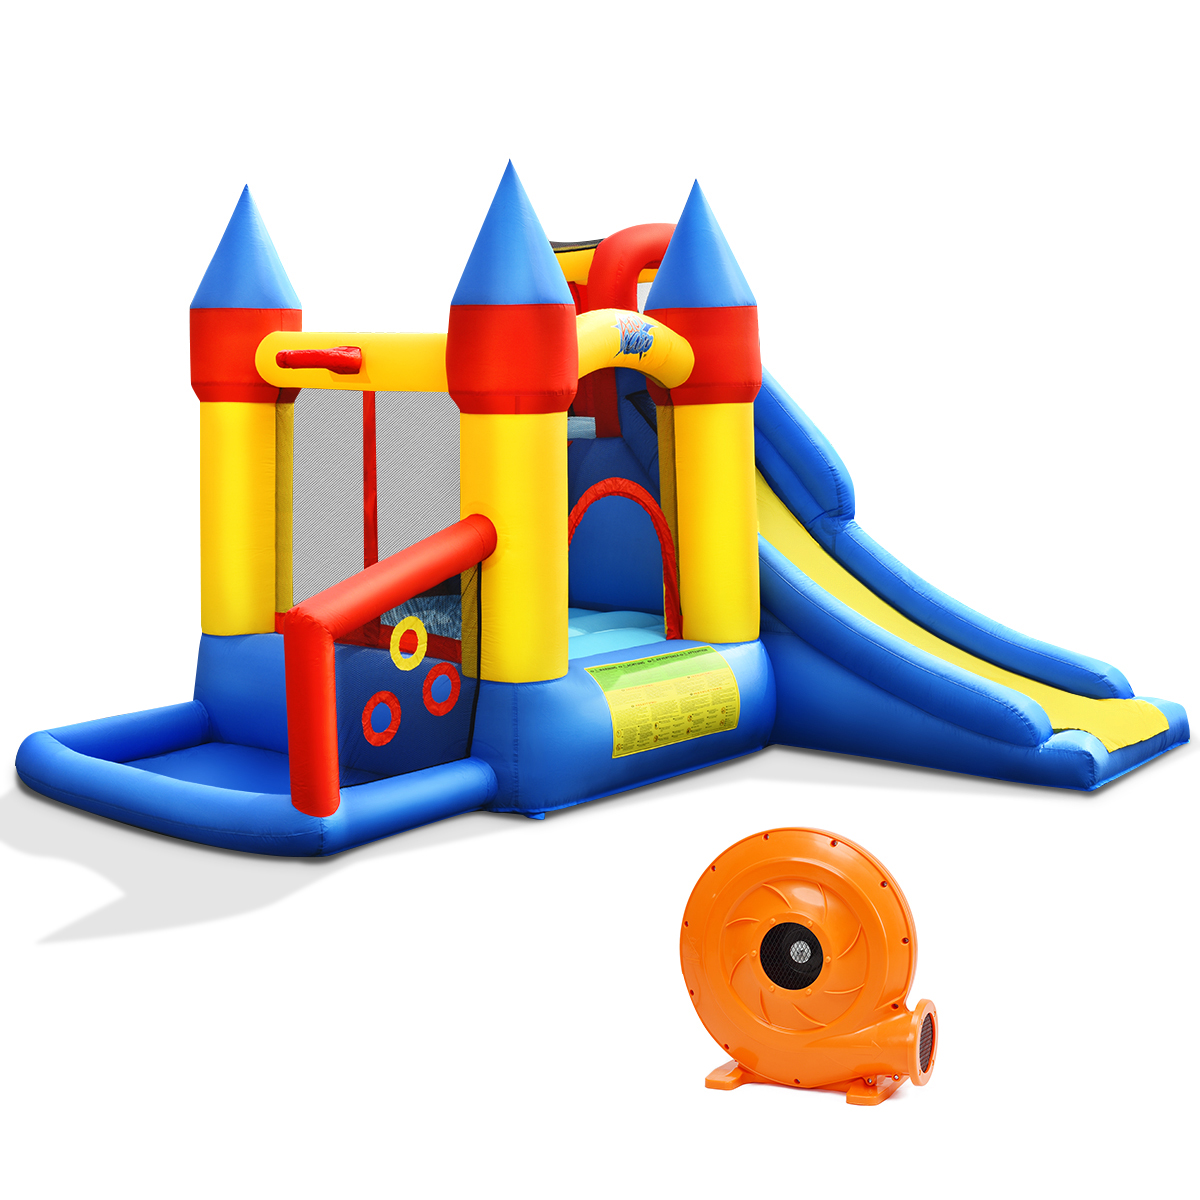 Costway Inflatable Bounce House Slide Bouncer Kids Castle Jumper w/ Balls & 780W Blower - image 1 of 10